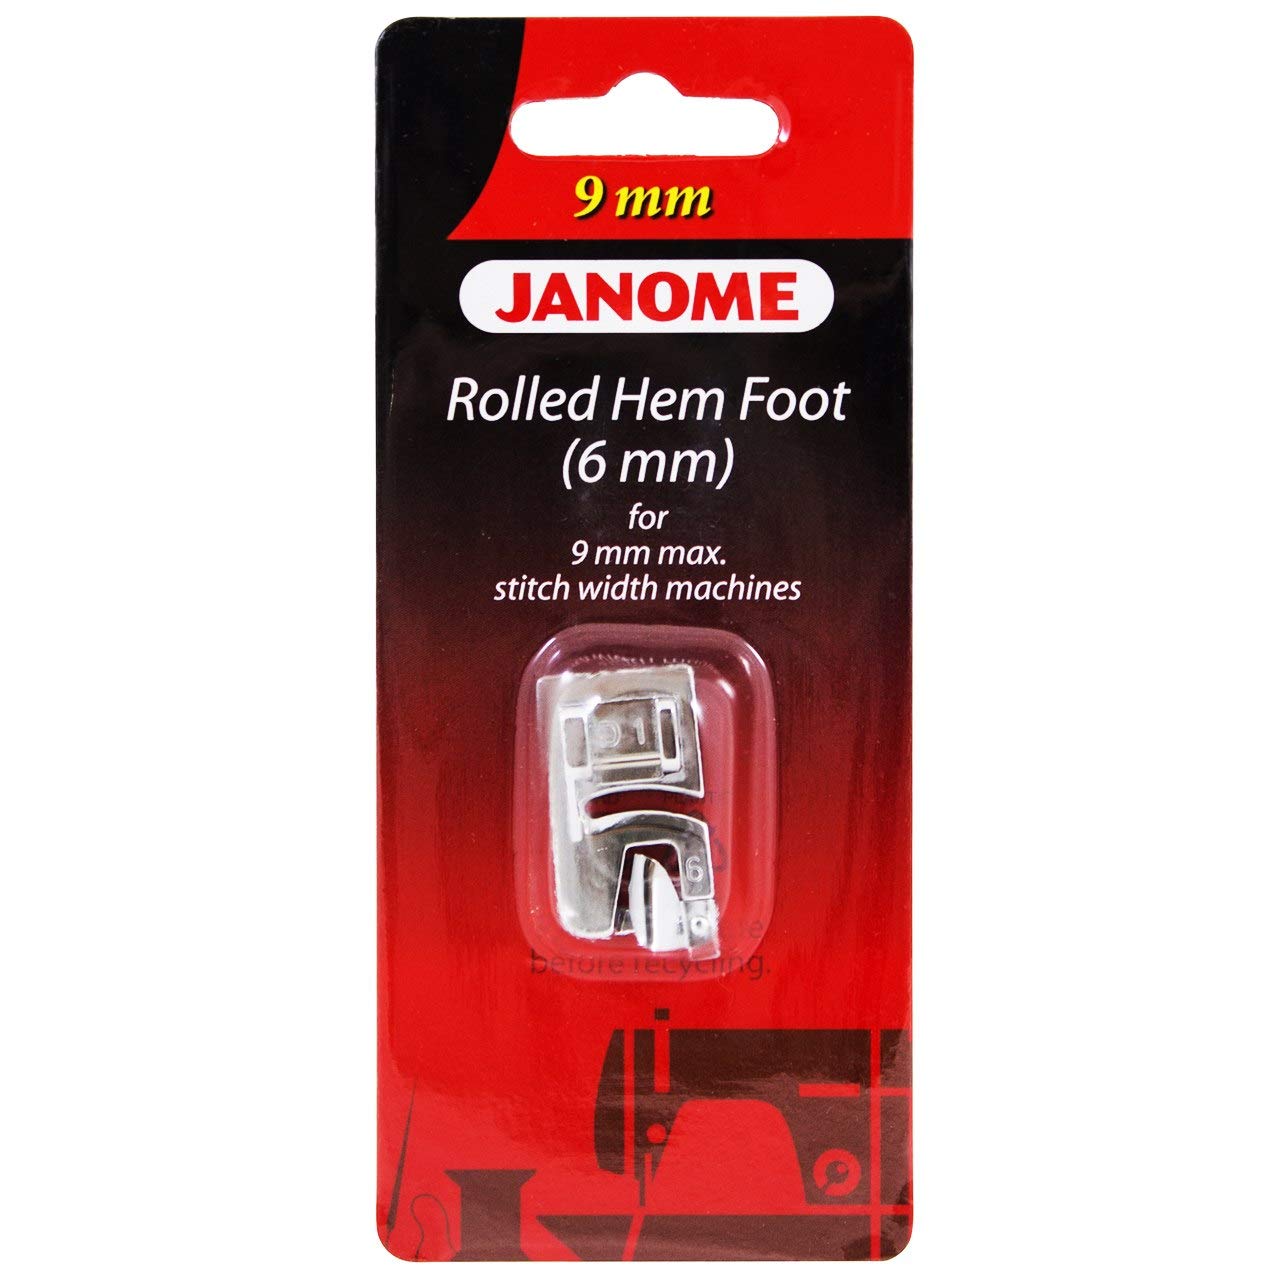 Janome Rolled Hem Foot 6mm